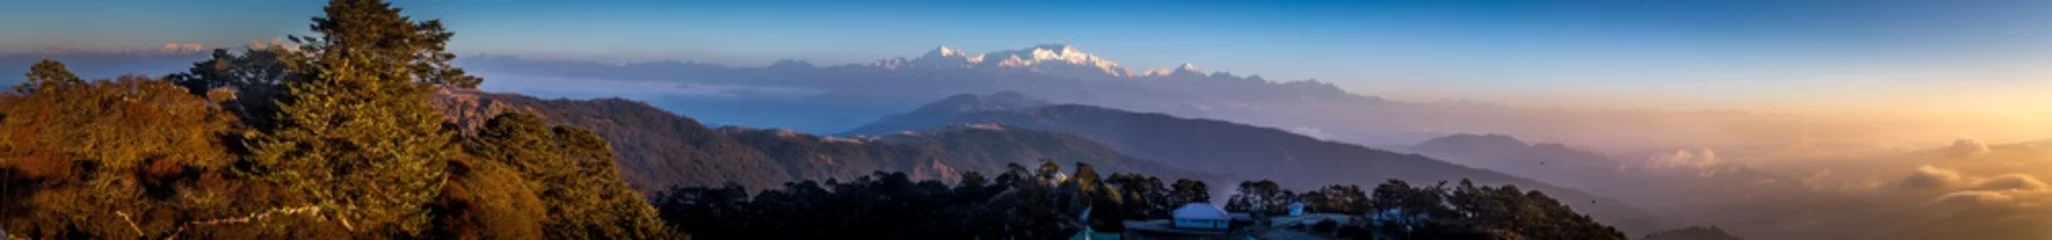 No drill roller blinds Makalu Kanchenjunga and Everest in a single frame, Sandakphu,West Bengal, india